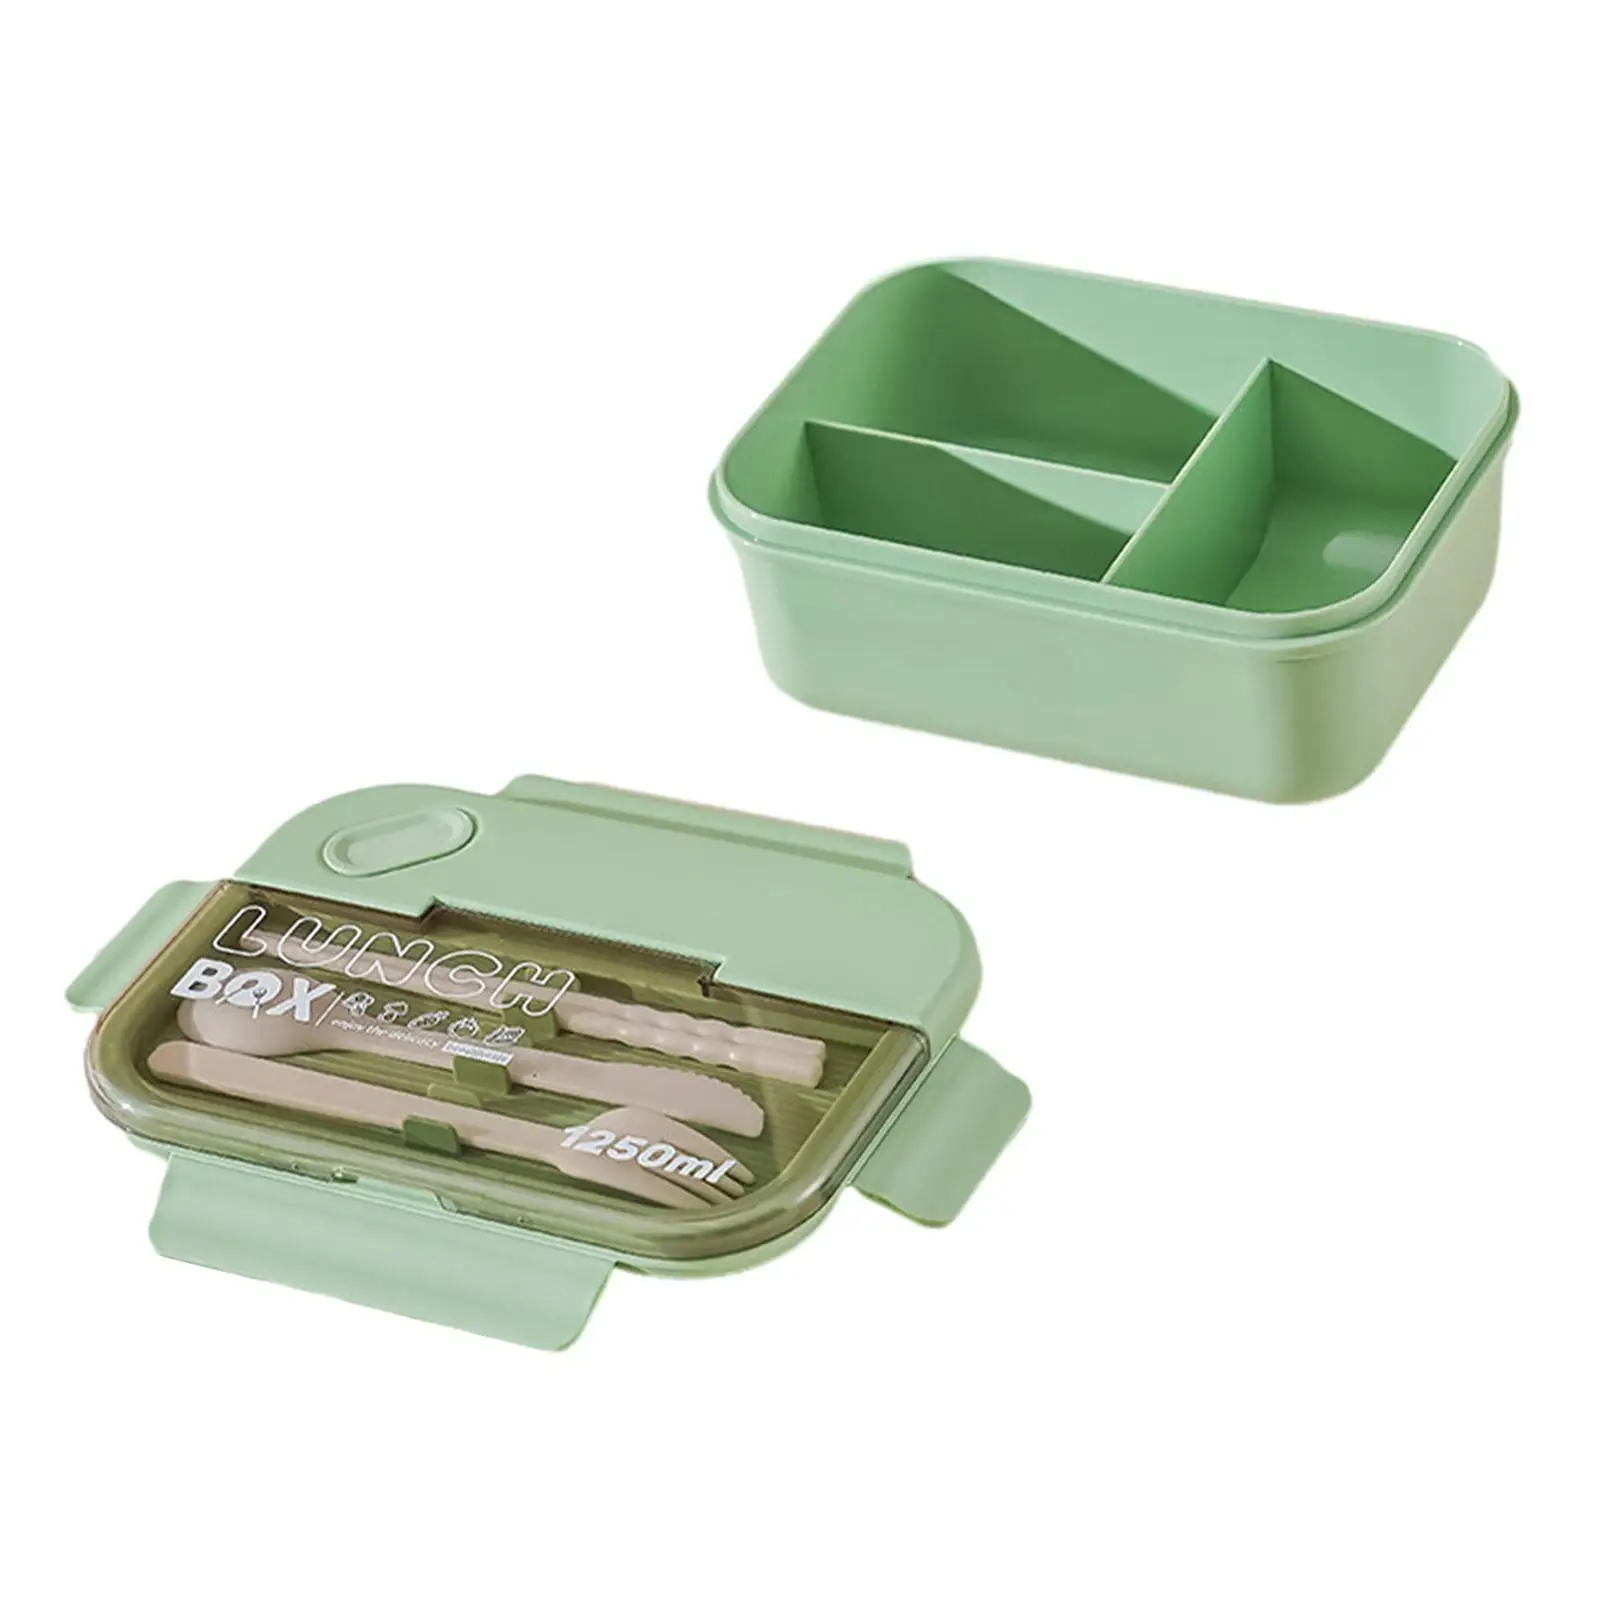 Japanese Bento Lunch Box 1250ml Office Bento Box Multifunctional Container Snack Box for Home Office Hiking